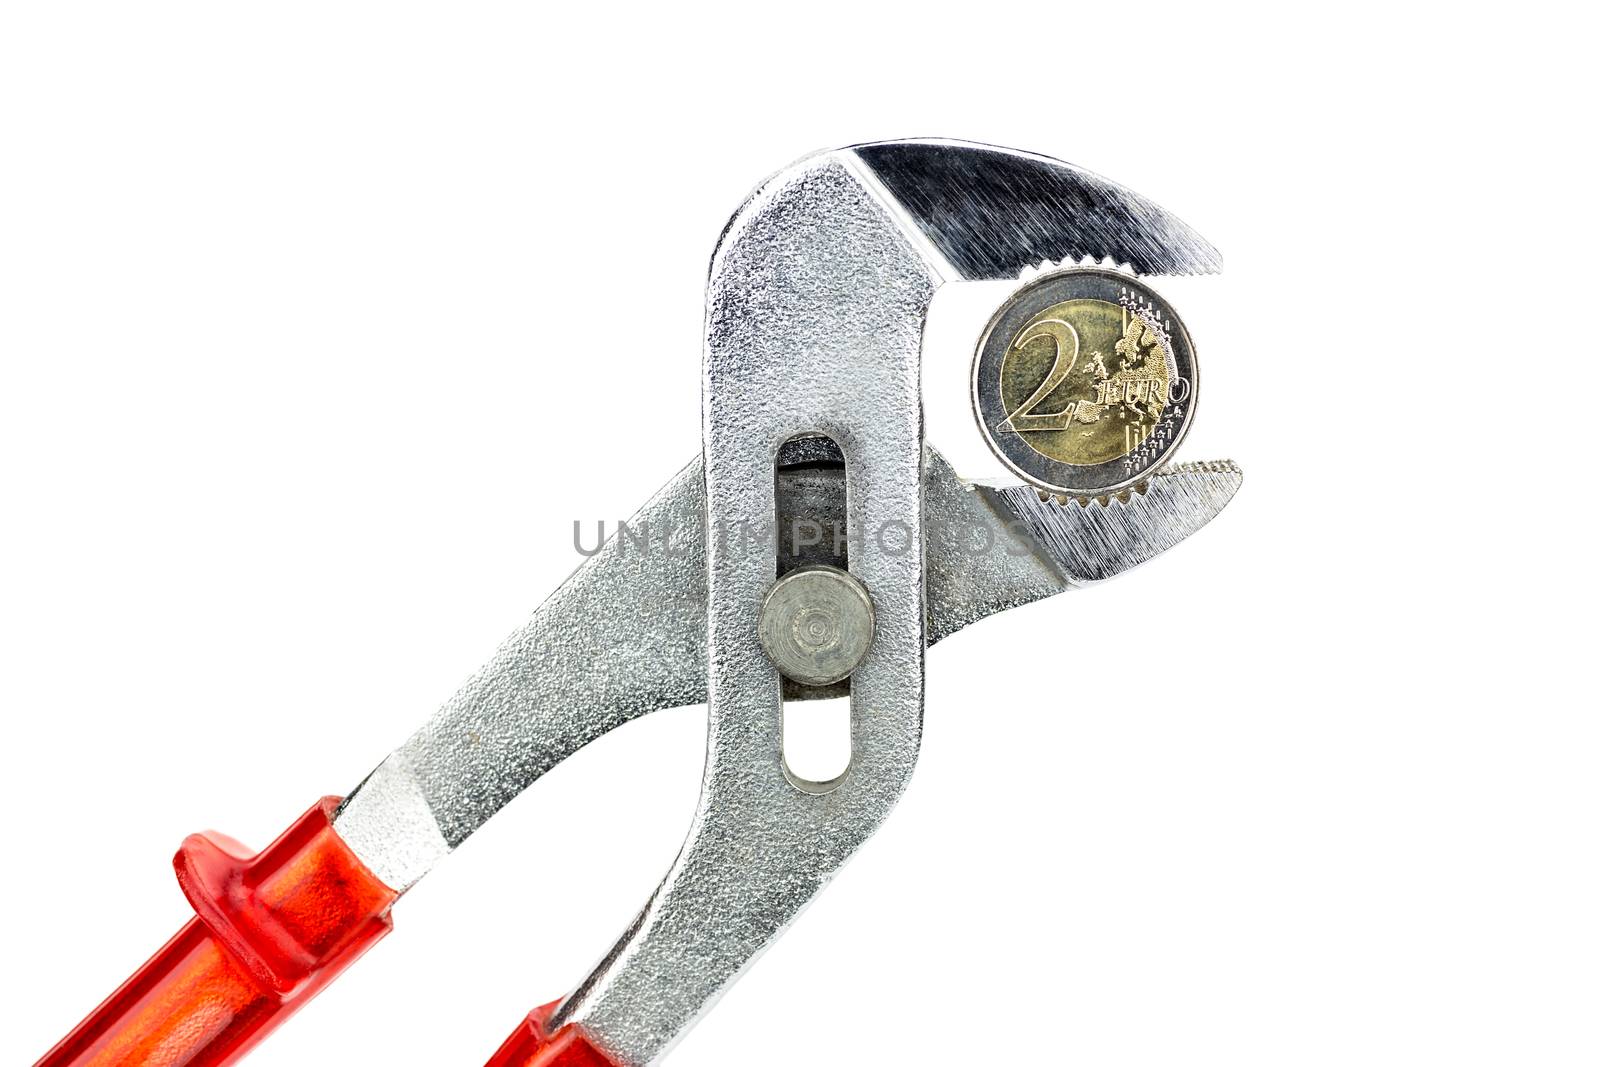 Water pump pliers holding two euro coin isolated on white background